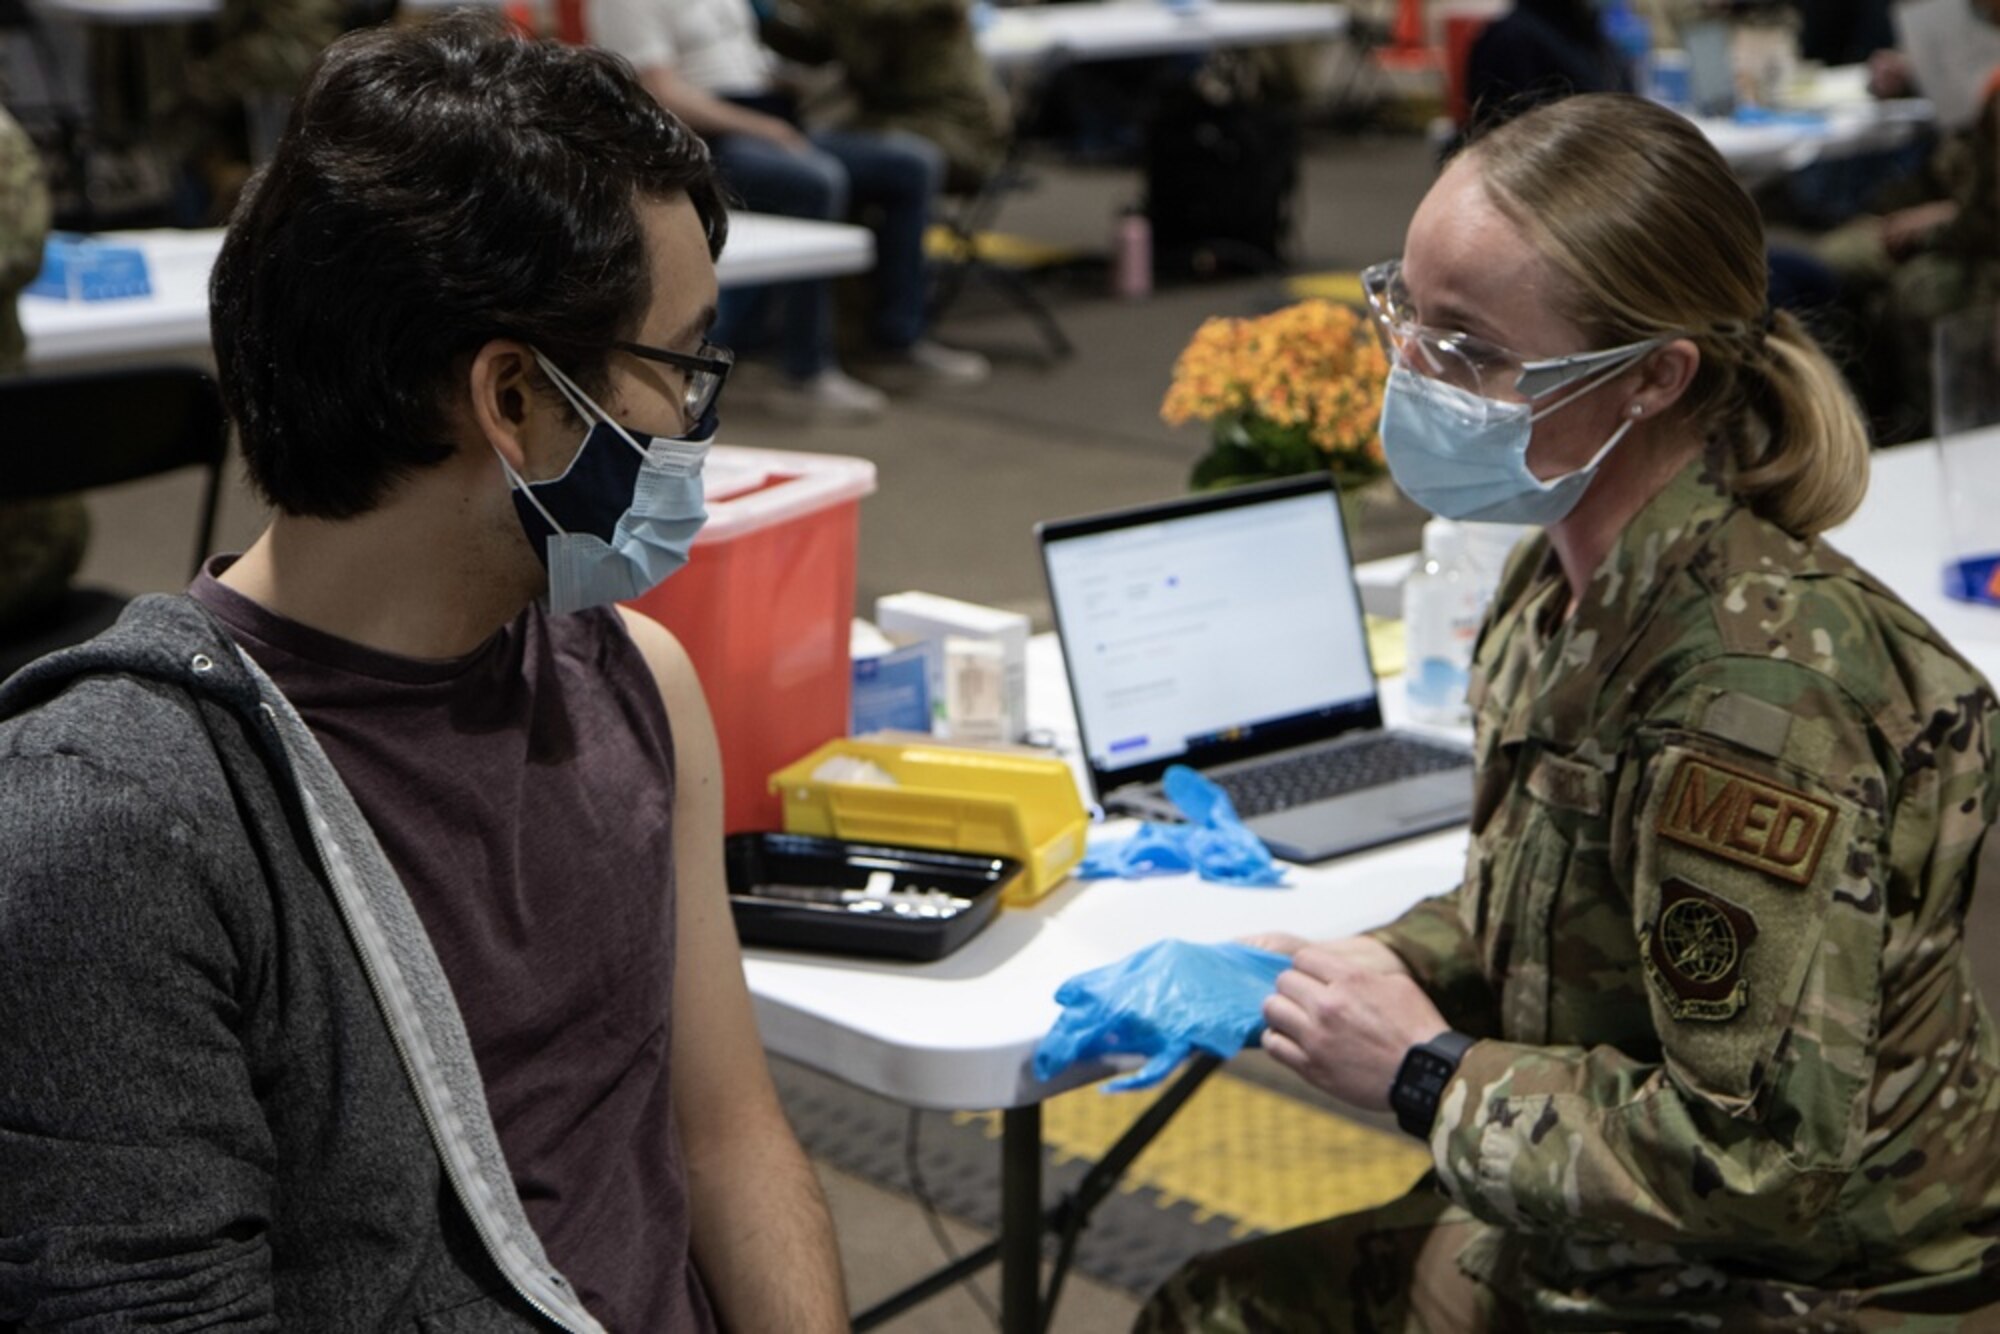 U.S. Air Force Senior Airman Daschia Lawrence, with the 92nd Health Care Operations Squadron, administers the 10,000th vaccine since the start of operations at the Community Vaccination Center (CVC) in St. Paul, Minnesota, on April 16, 2021. Marc Ho, a data engineer based in Minneapolis, received the 10,000th COVID vaccine at the CVC, which is now completely operational and welcoming the St. Paul community. U.S. Northern Command, through U.S. Army North, remains committed to providing continued, flexible Department of Defense support to the Federal Emergency Management Agency as part of the whole-of-government response to COVID-19.